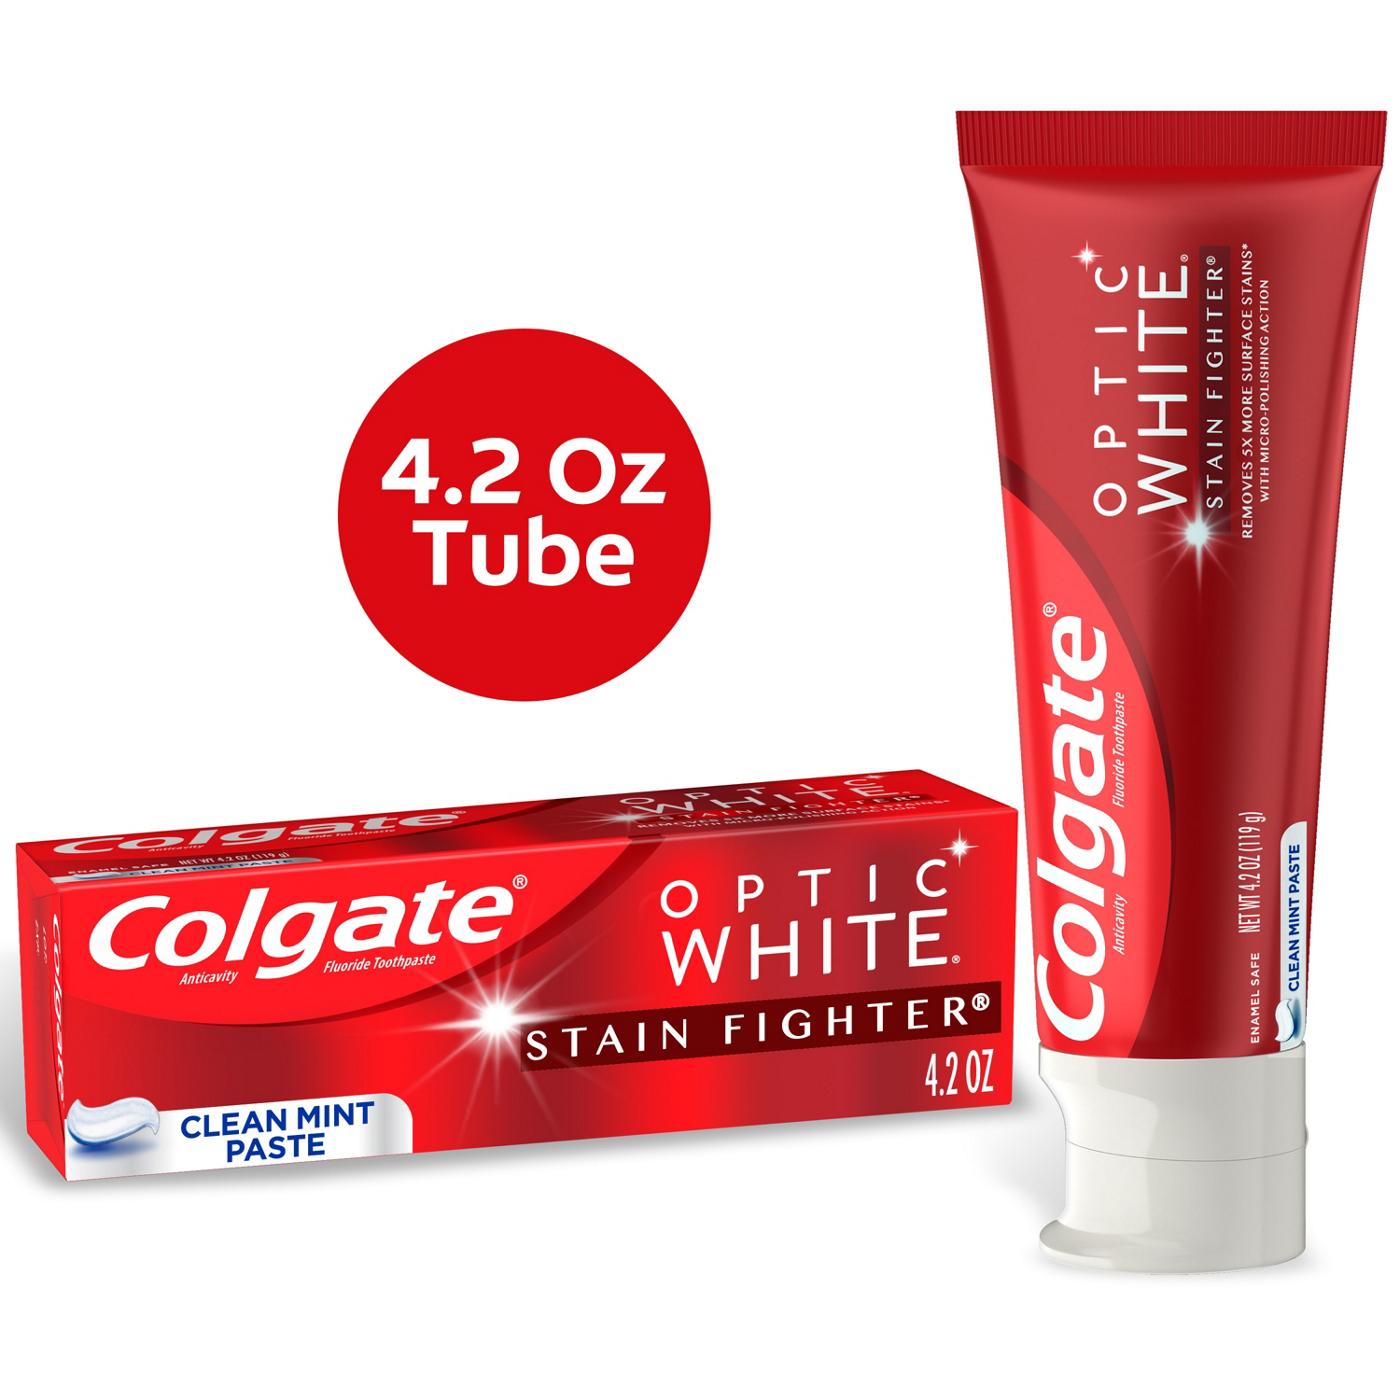 Colgate Optic White Anticavity Toothpaste - Clean Mint; image 8 of 10